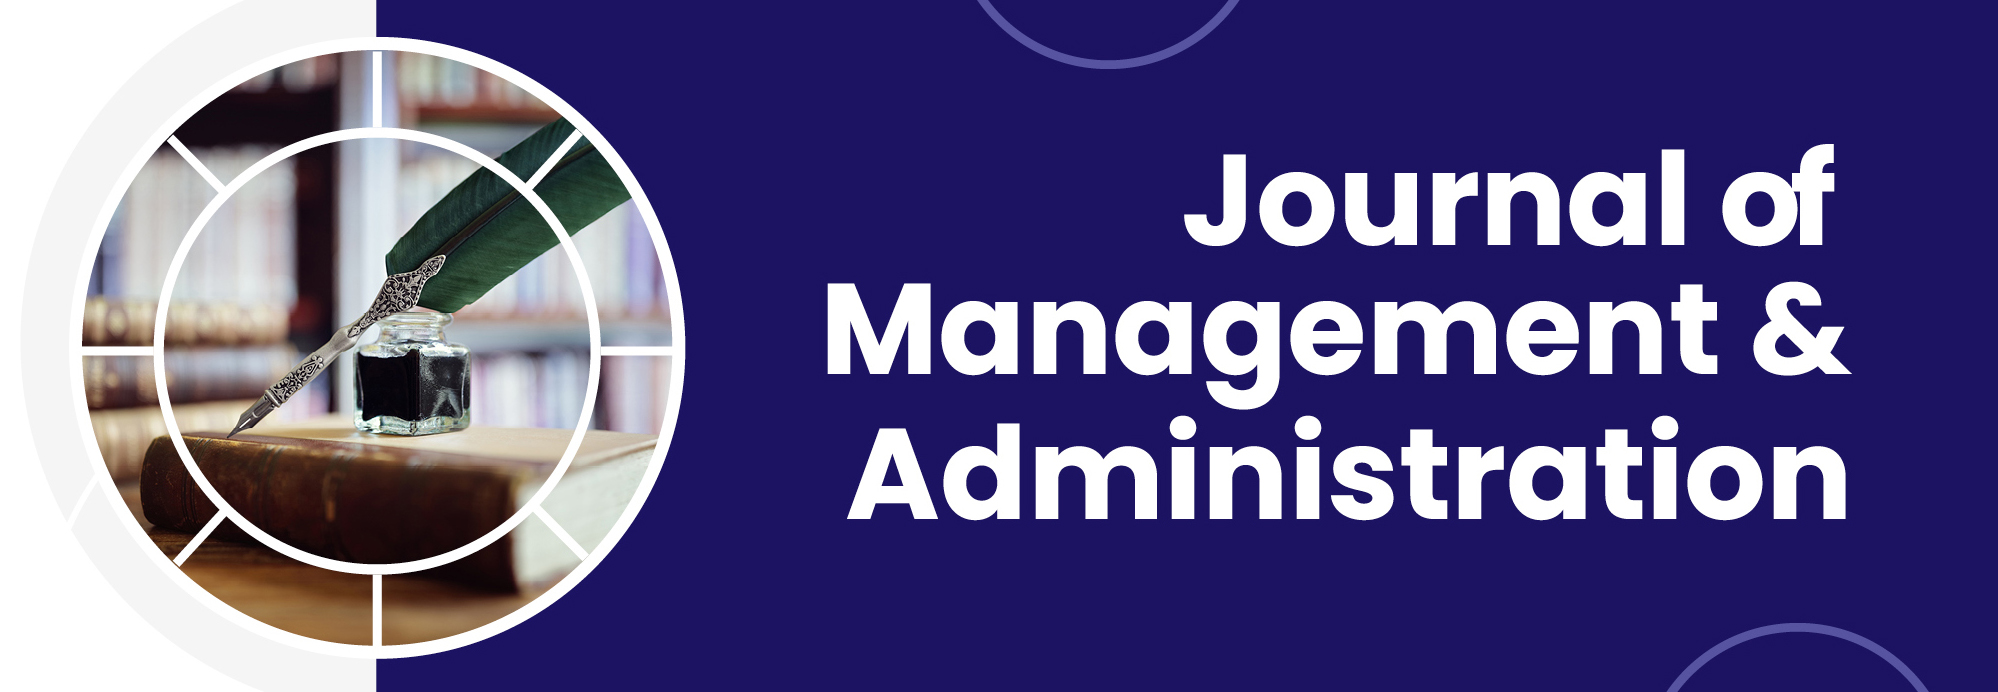 Journal of Management & Administration